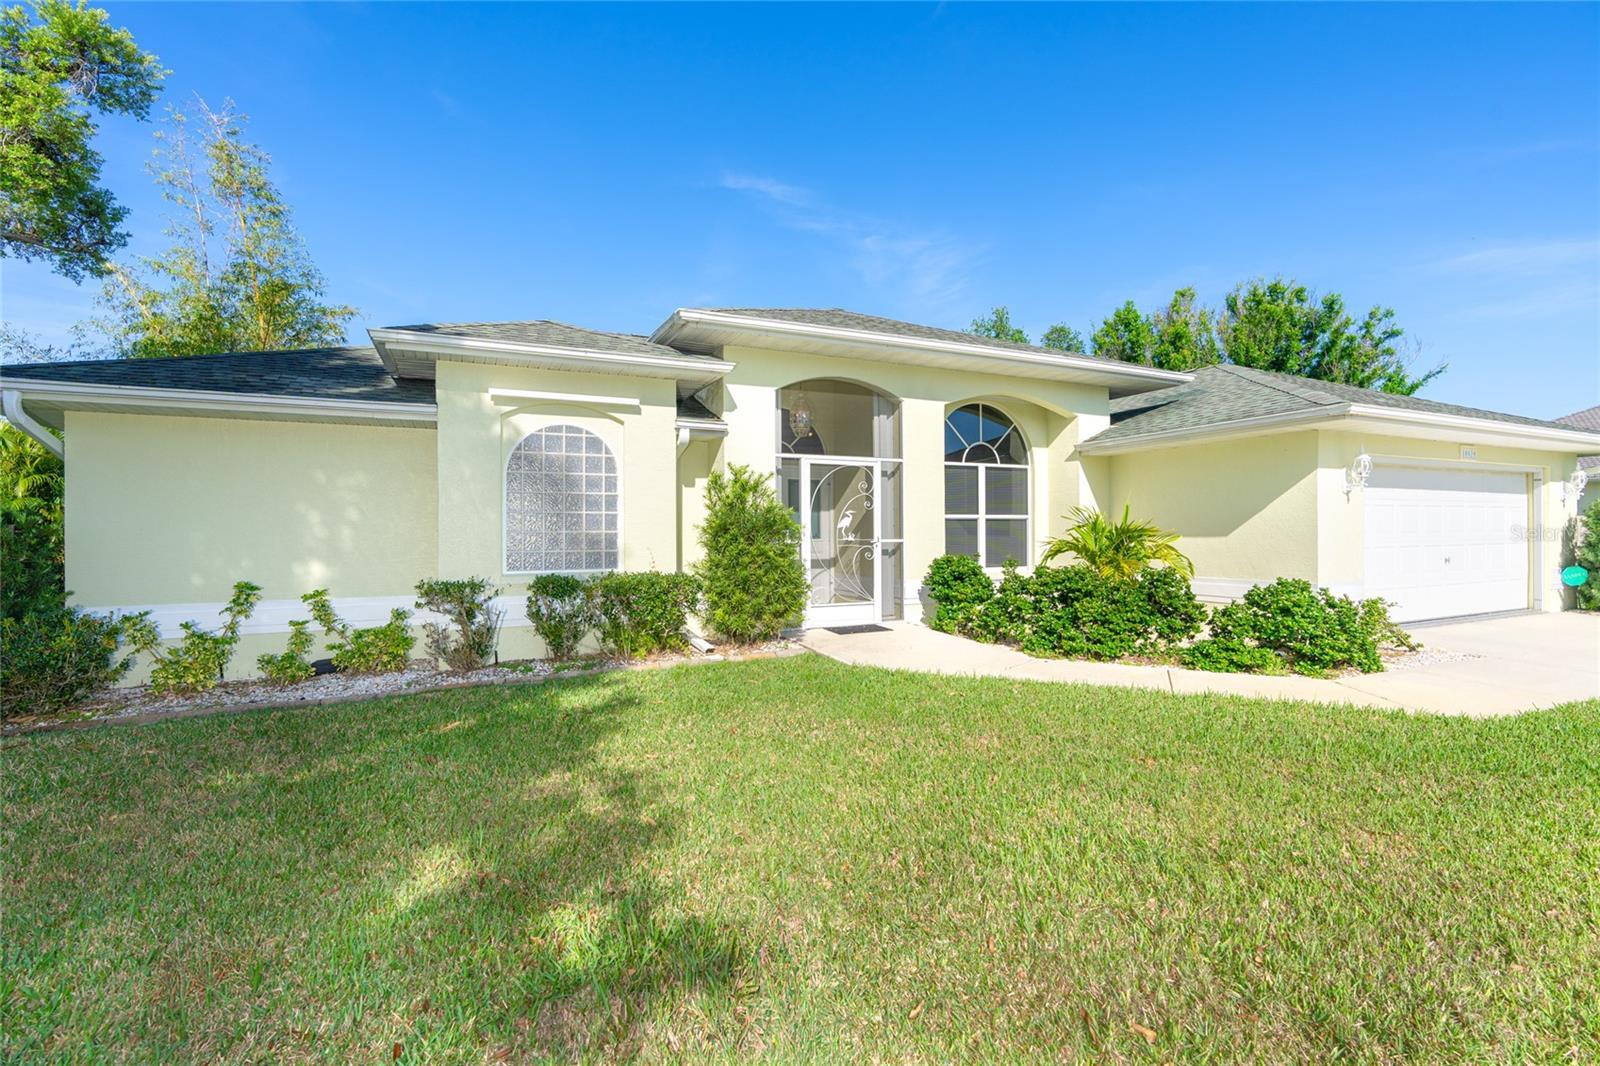 Photo one of 10039 Franklin Dr Englewood FL 34224 | MLS D6135596